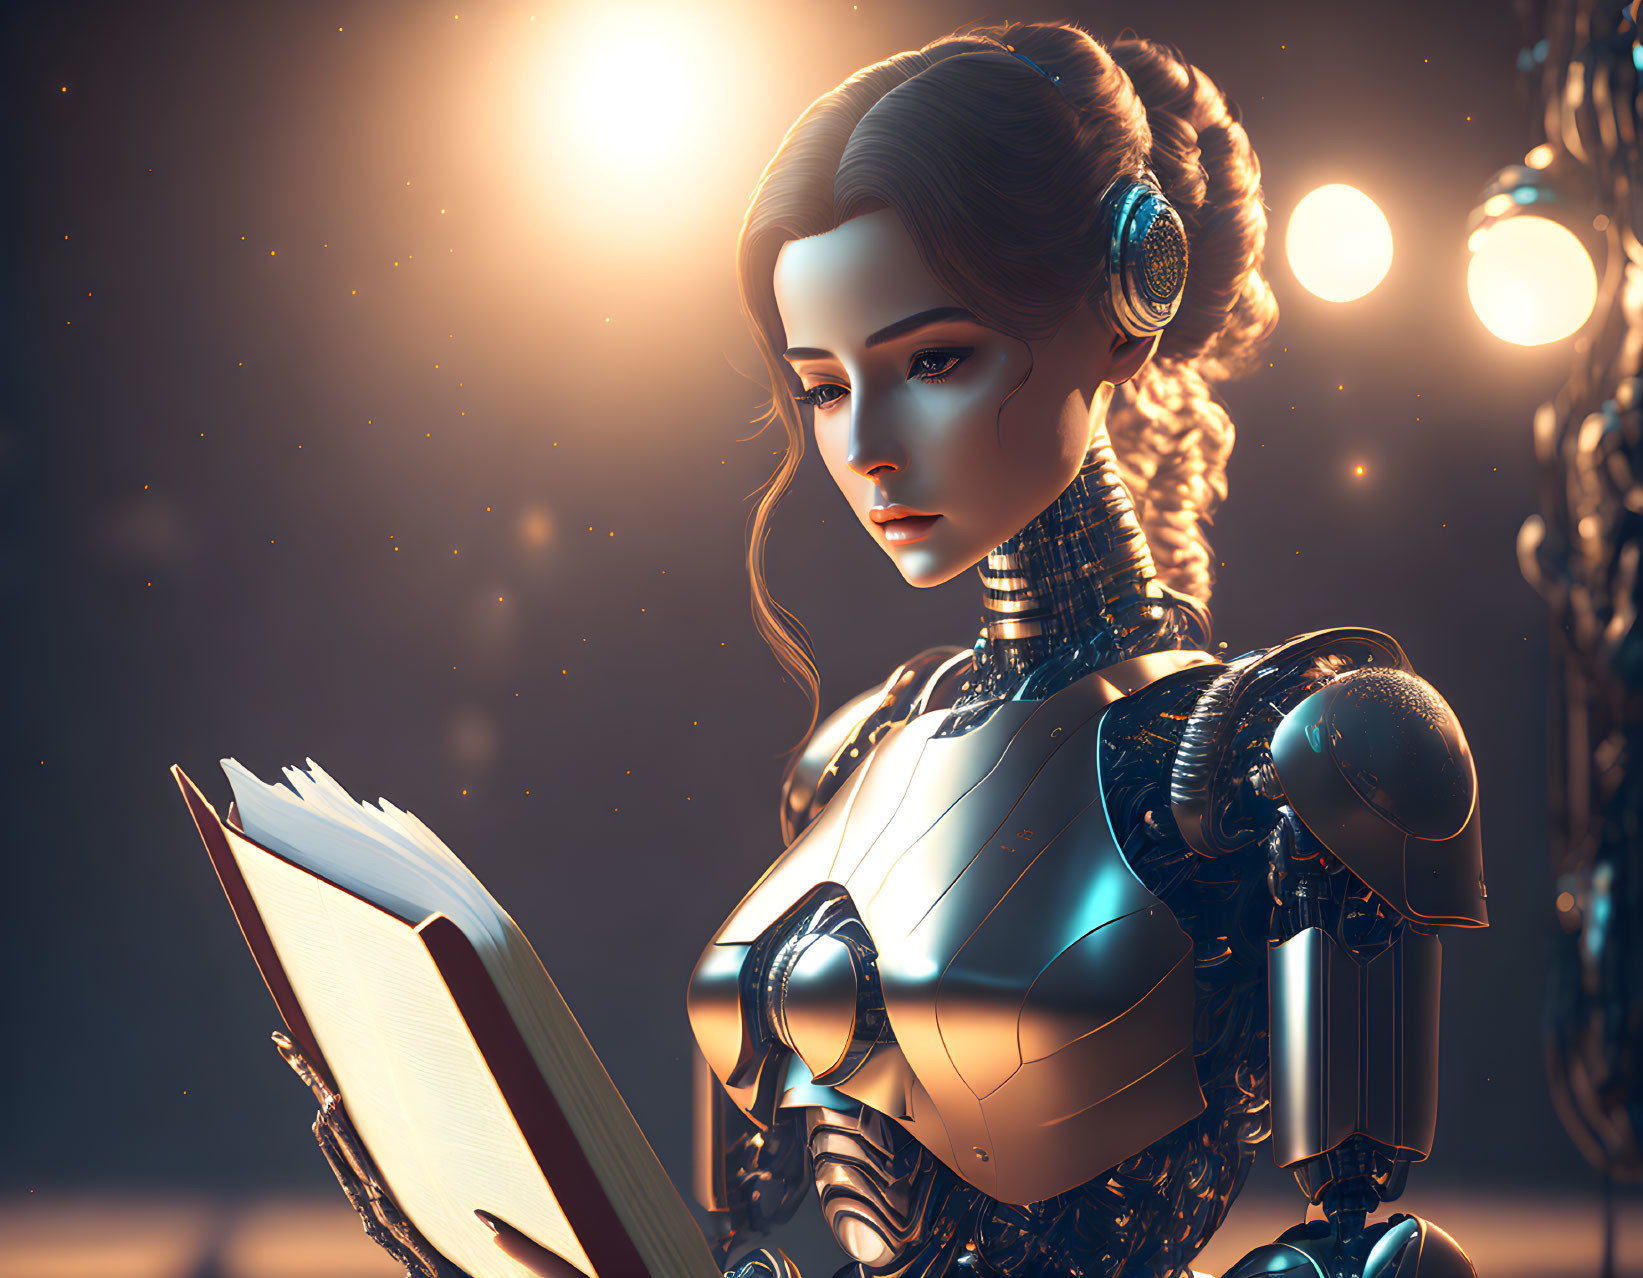 Female robot reading book in futuristic setting with soft glowing lights